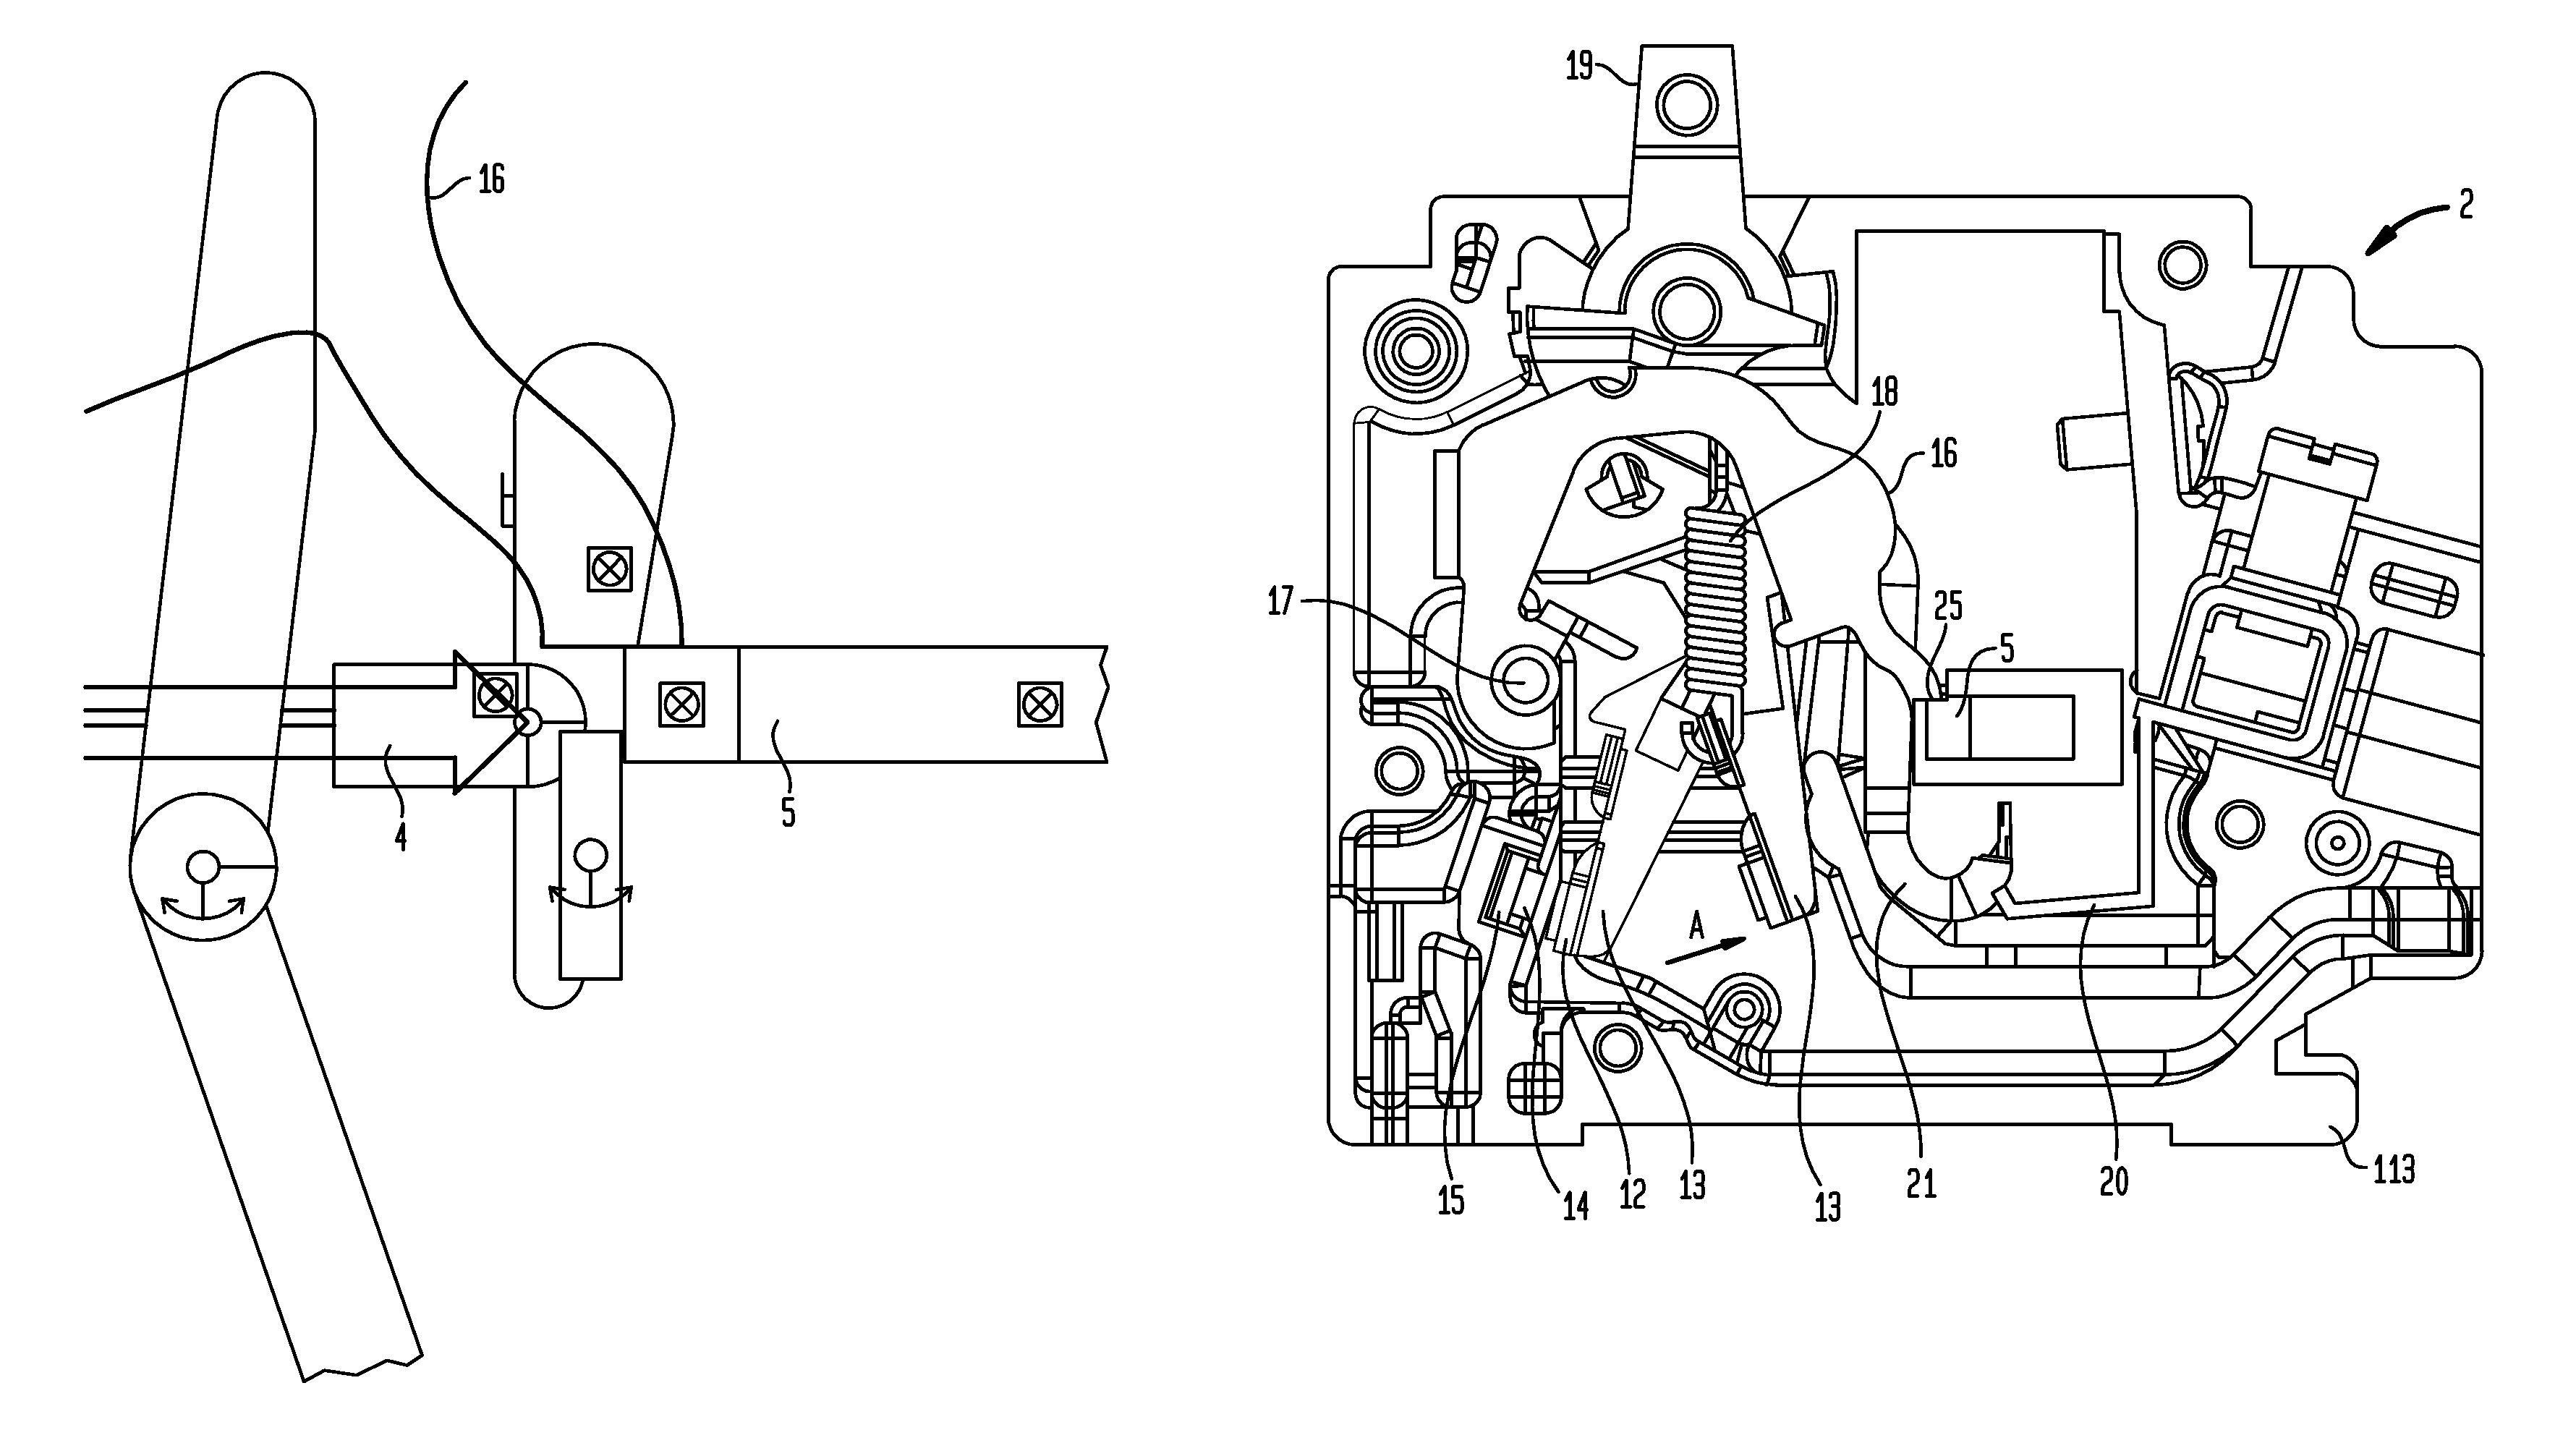 Circuit breaker with electronic sensing and de-latch activation